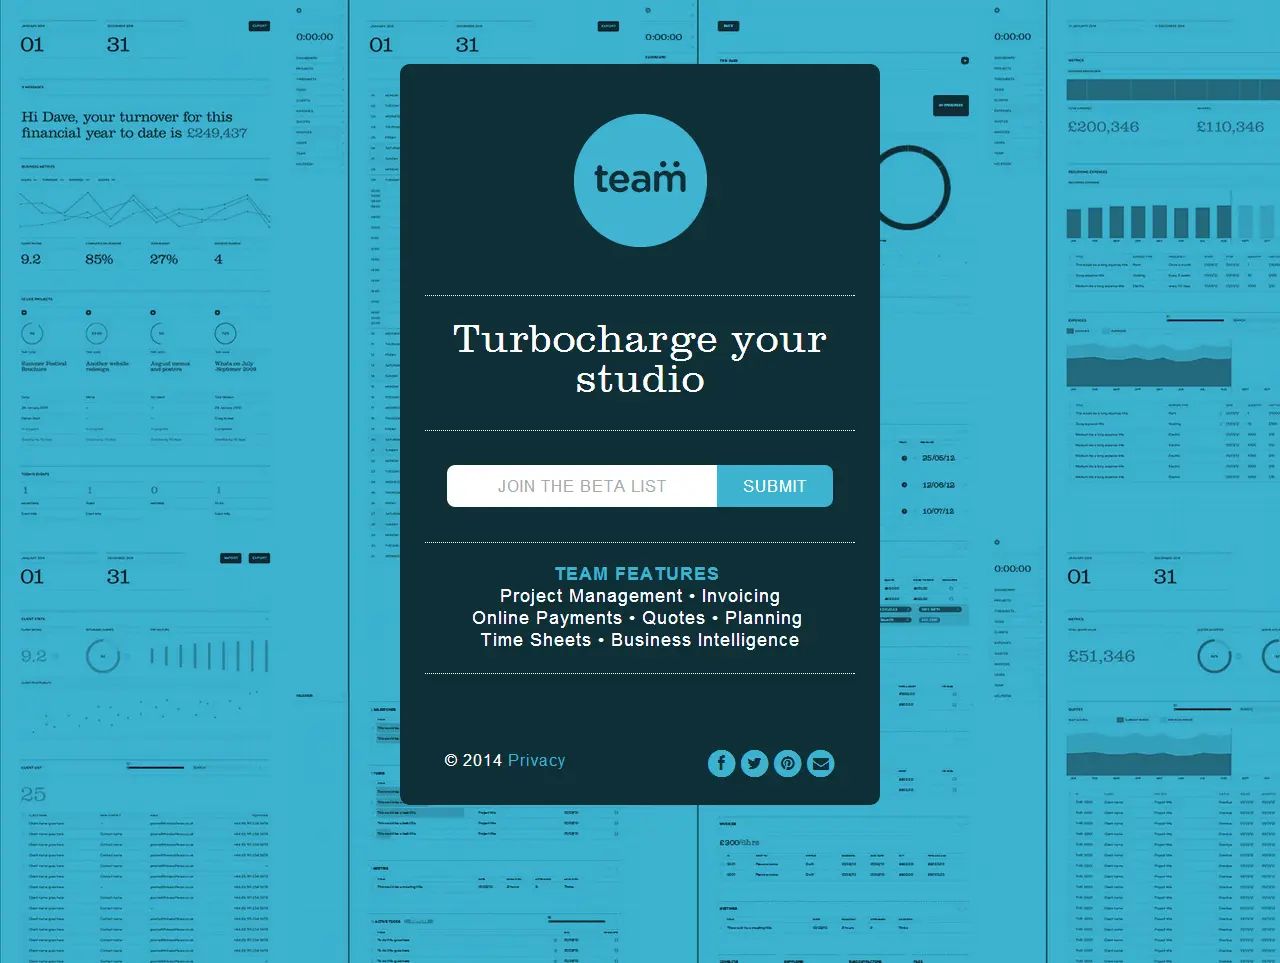 Great_use_of_a_background_image_to_explain_the_product_-_TeamApp